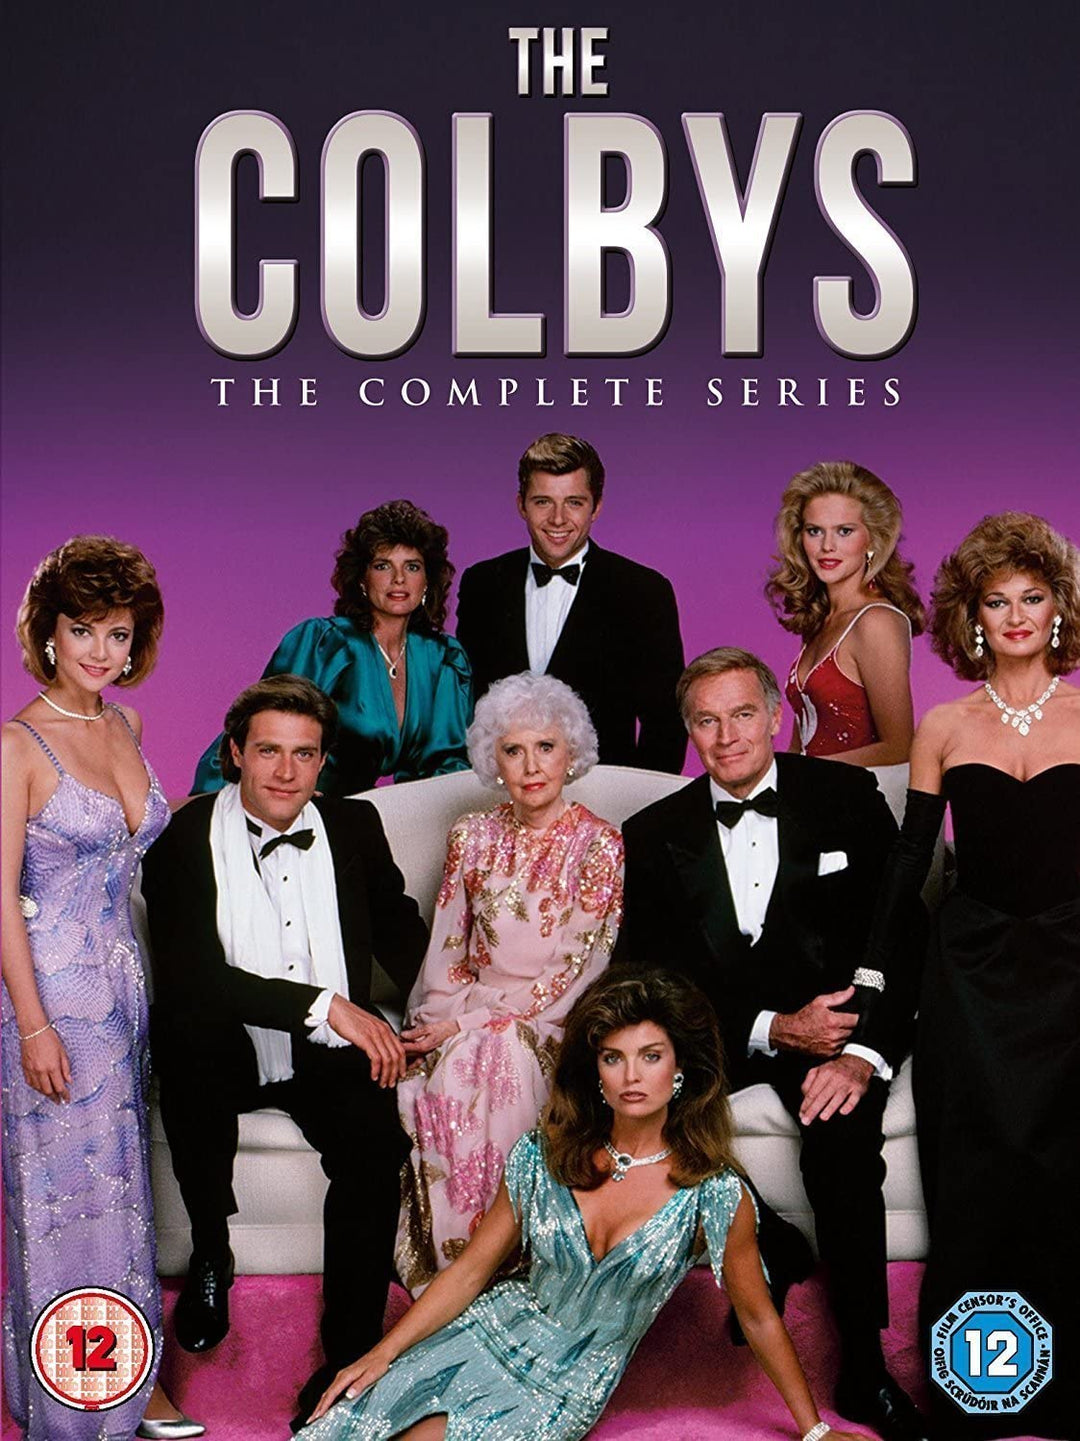 The Colbys: The Complete Series - Drama [DVD]